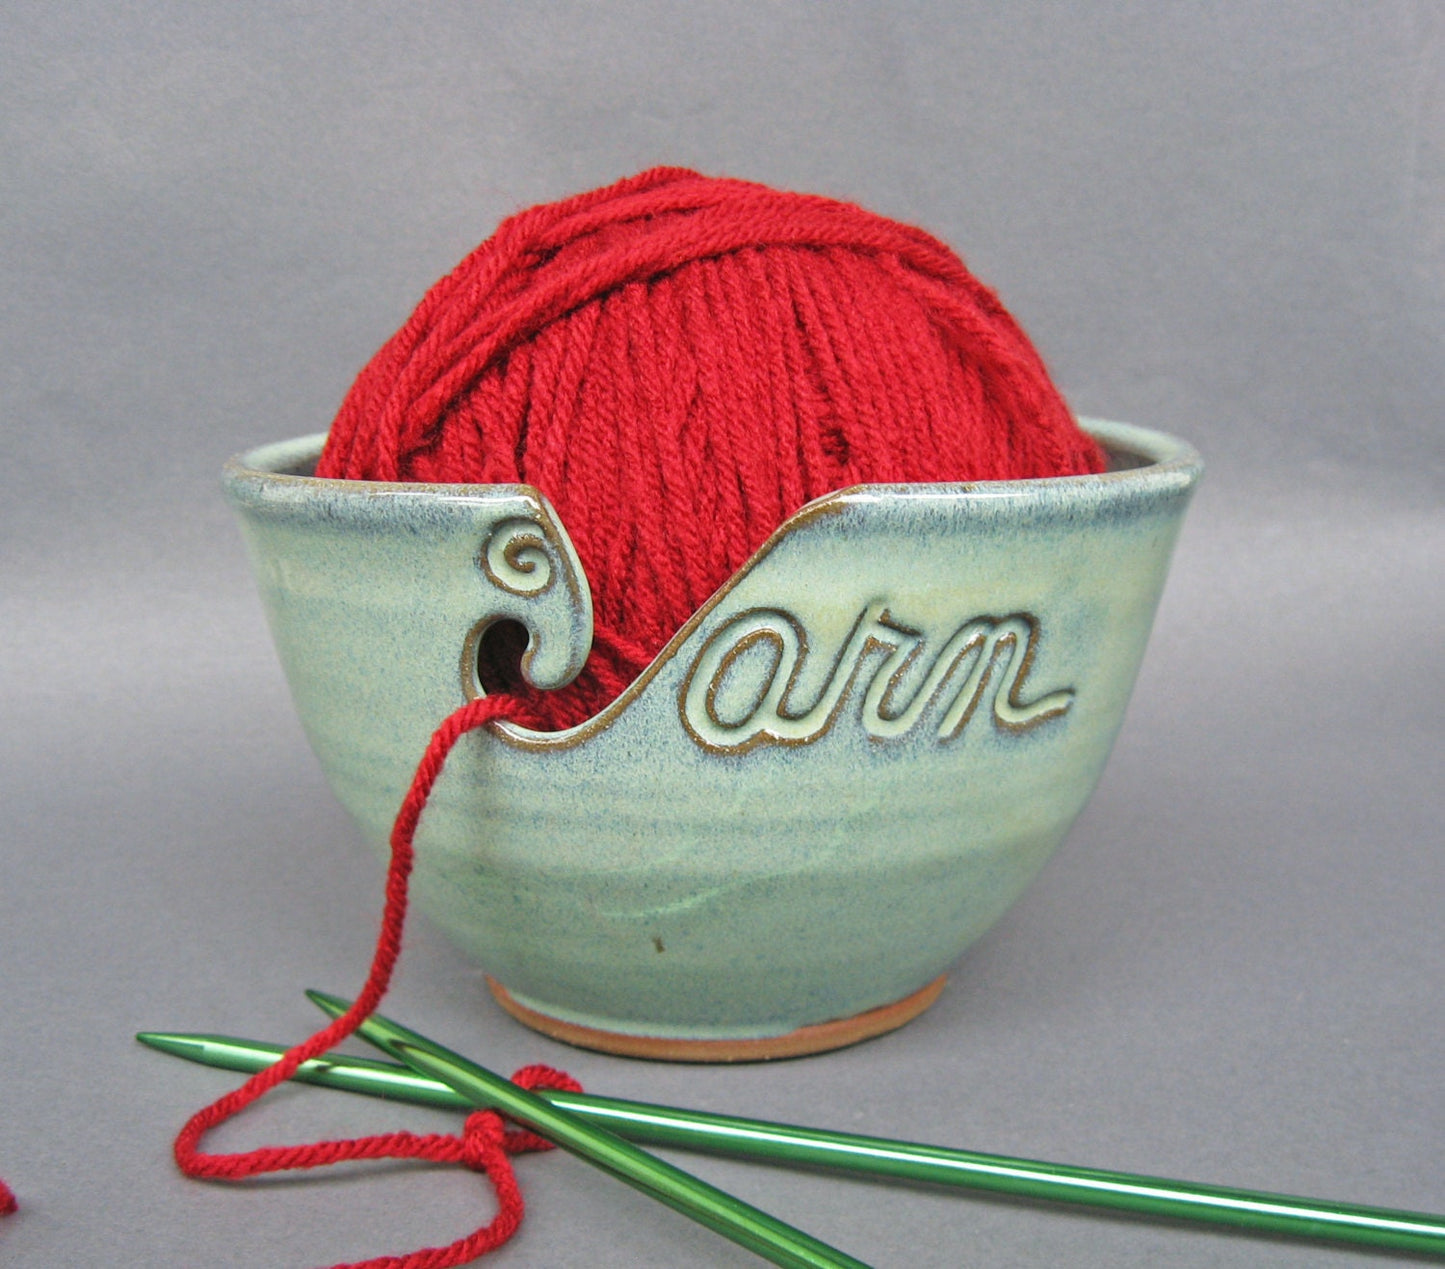 Yarn Bowl for Knitting and Crochet - Handmade with Eco-Friendly